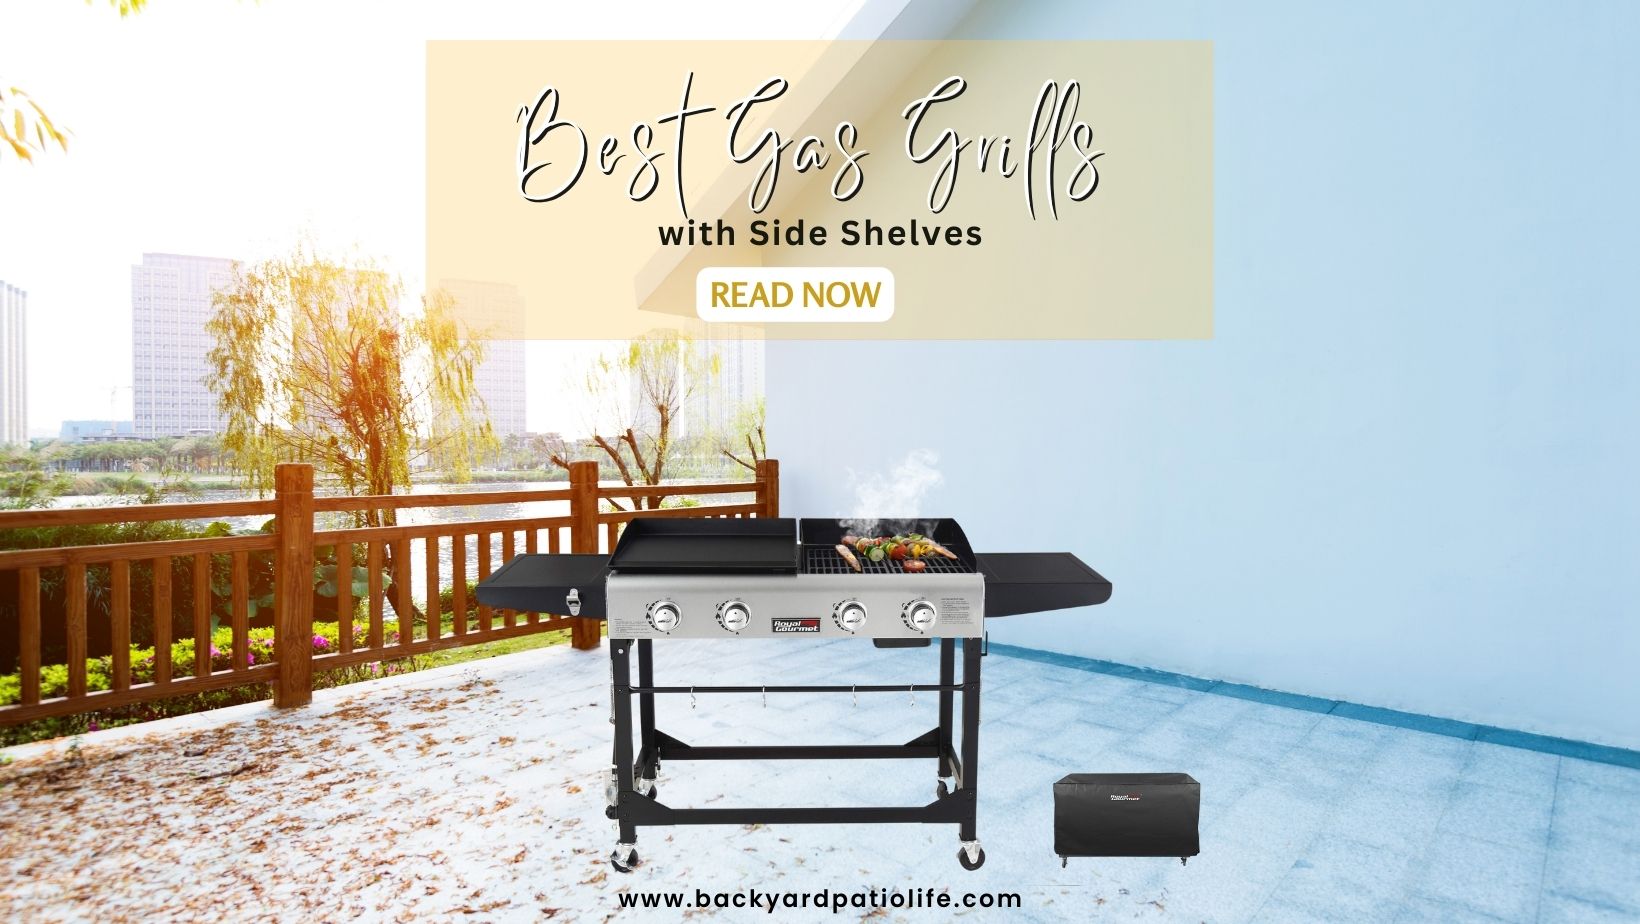 Best Gas Grills with Side Shelves